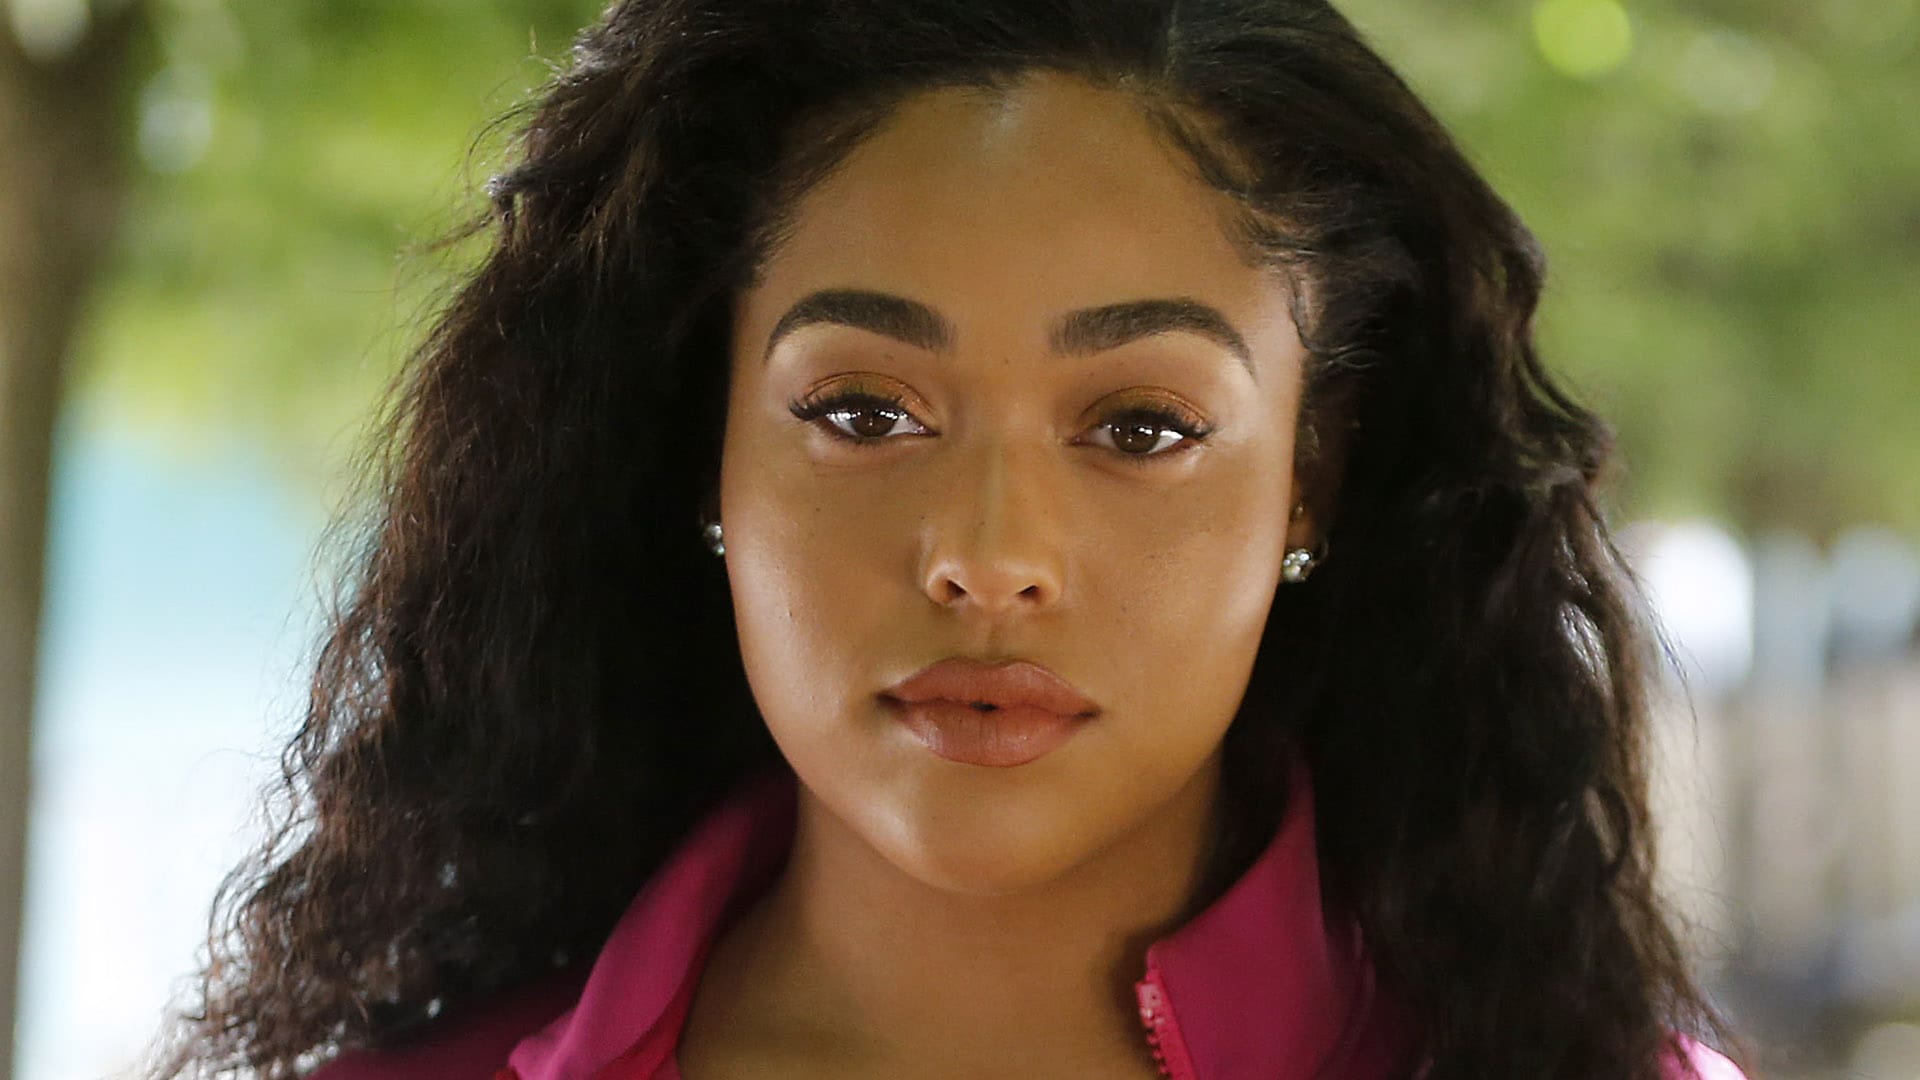 Jordyn Woods Makes Fans Happy With This Simple Hair Tutorial - Watch The Video!